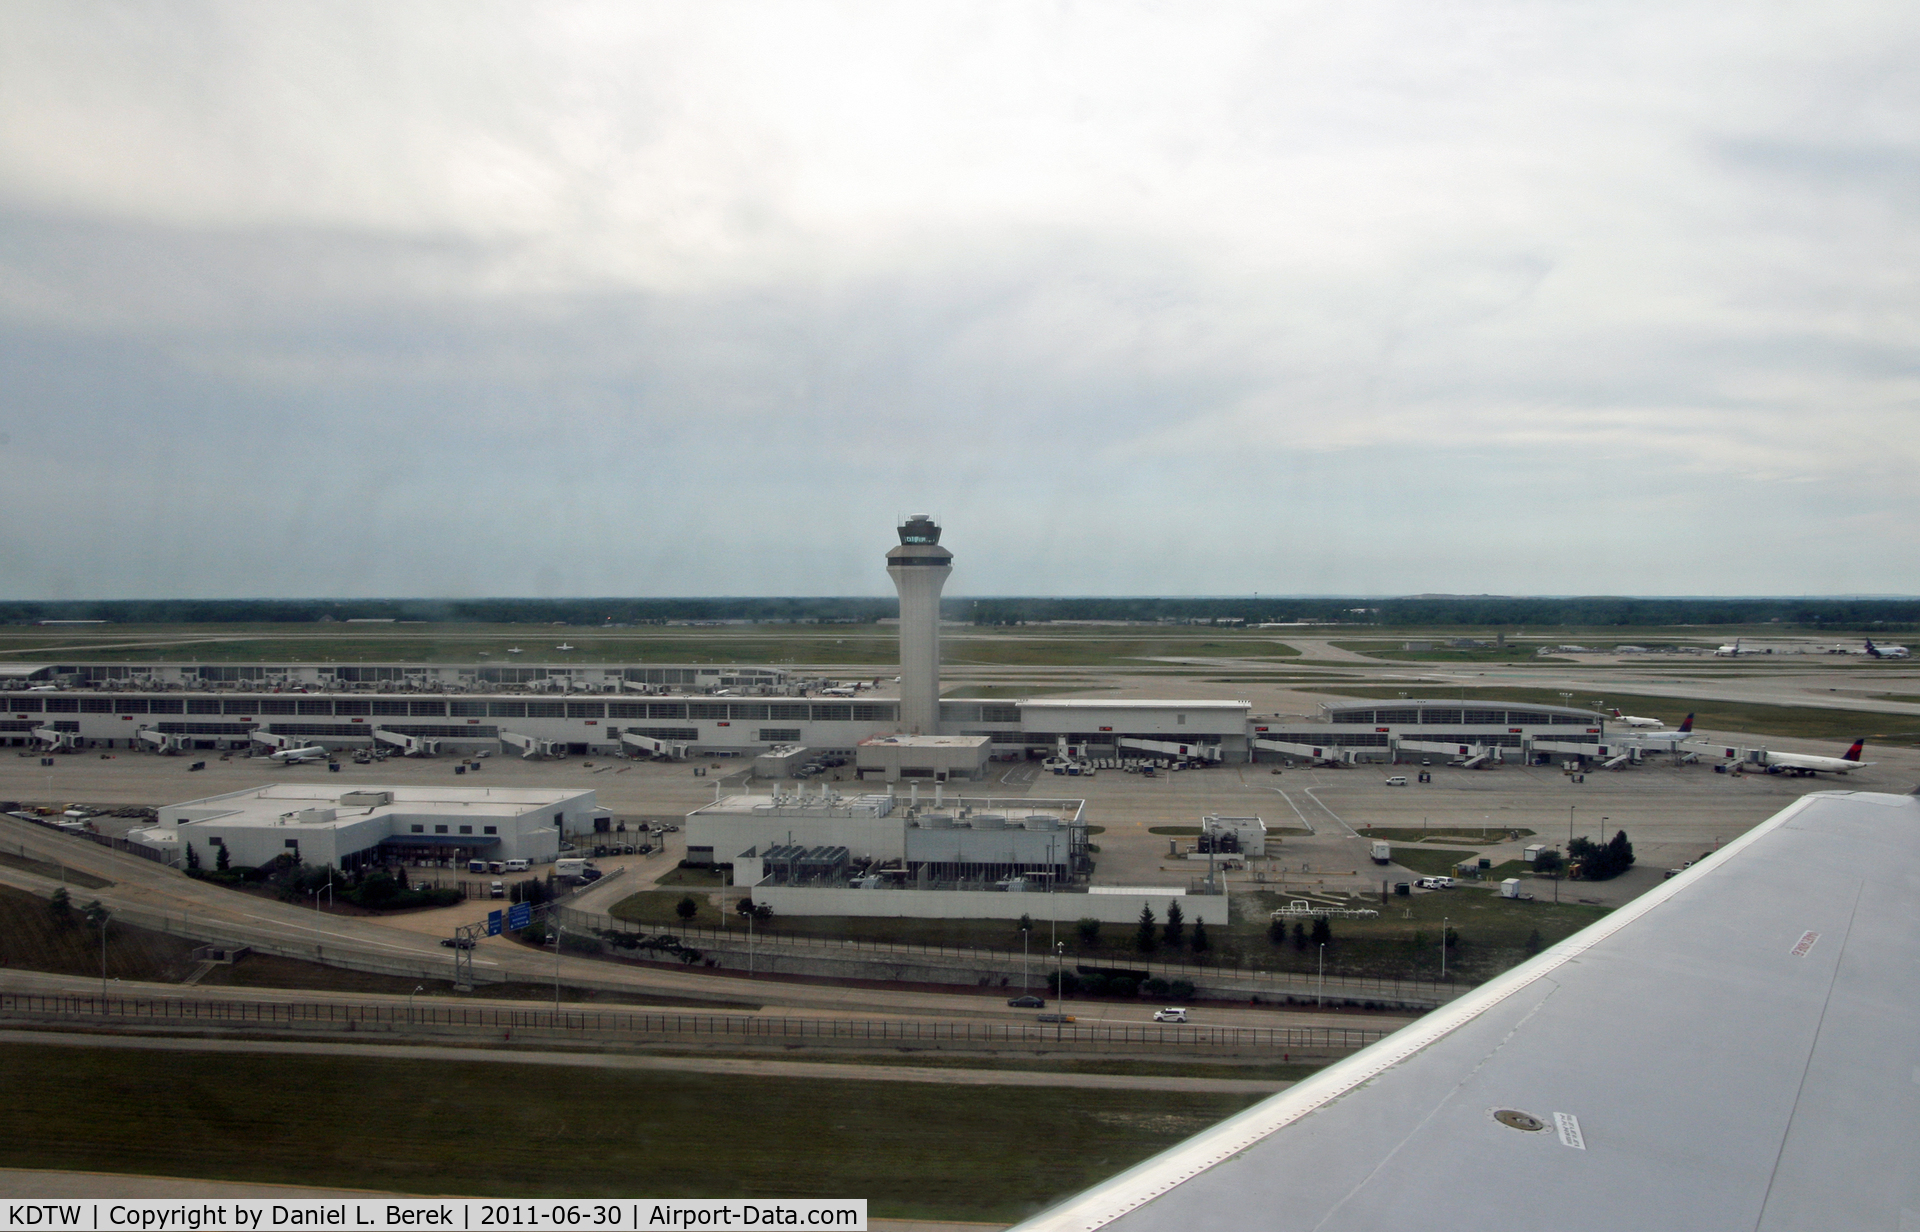 Detroit Metropolitan Wayne County Airport (DTW) - The two new terminals are visible as we take off from runway 21L.